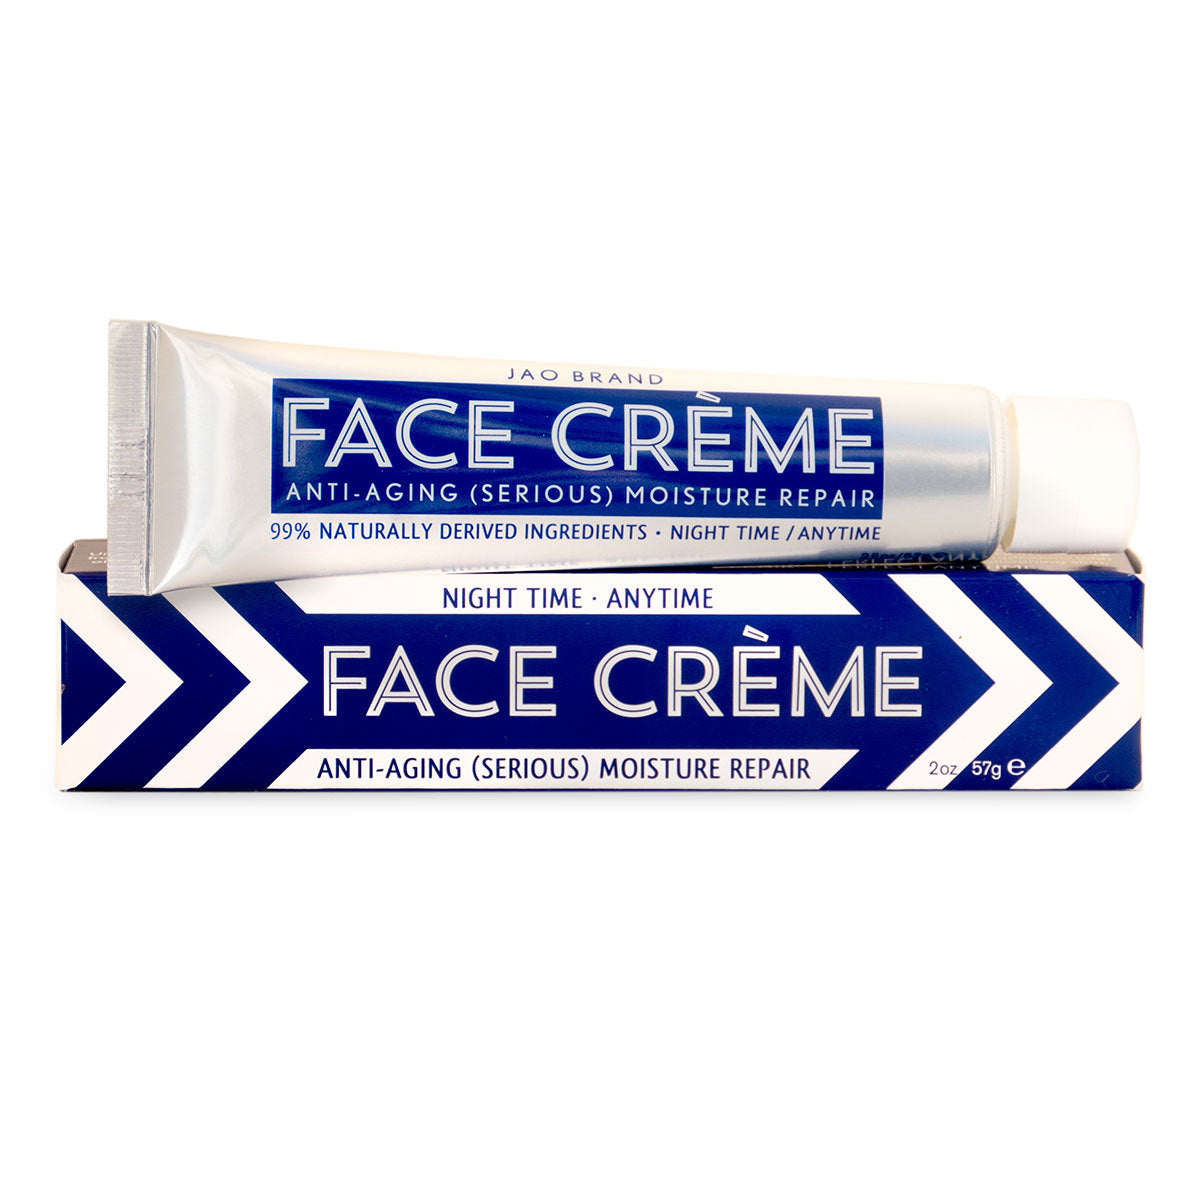 Primary image of Face Creme